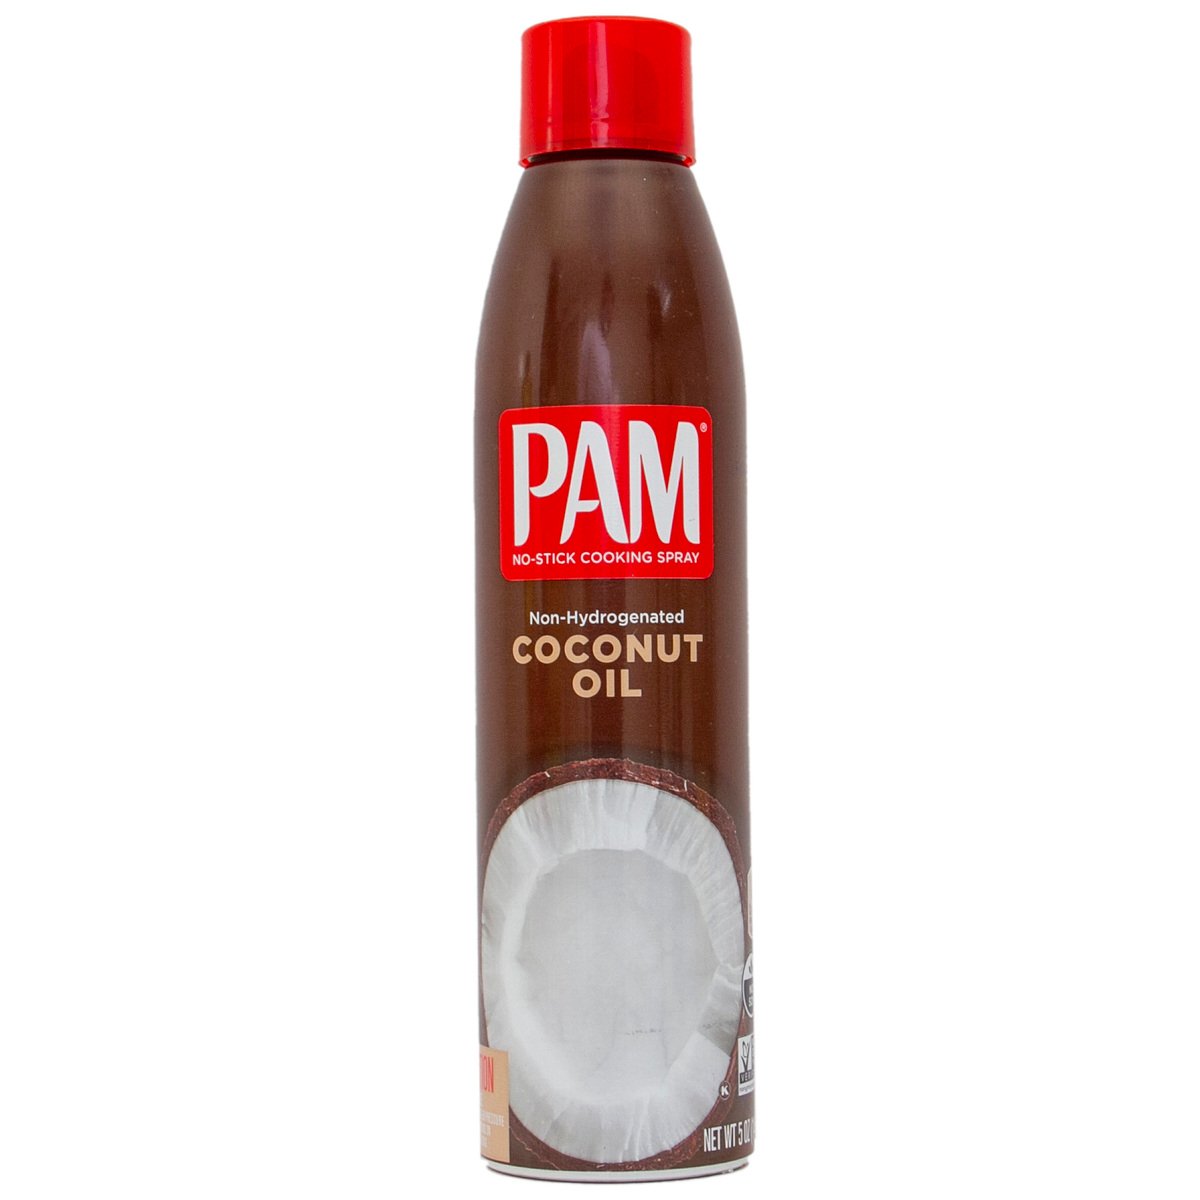 Pam Cooking Spray Coconut Oil 5oz